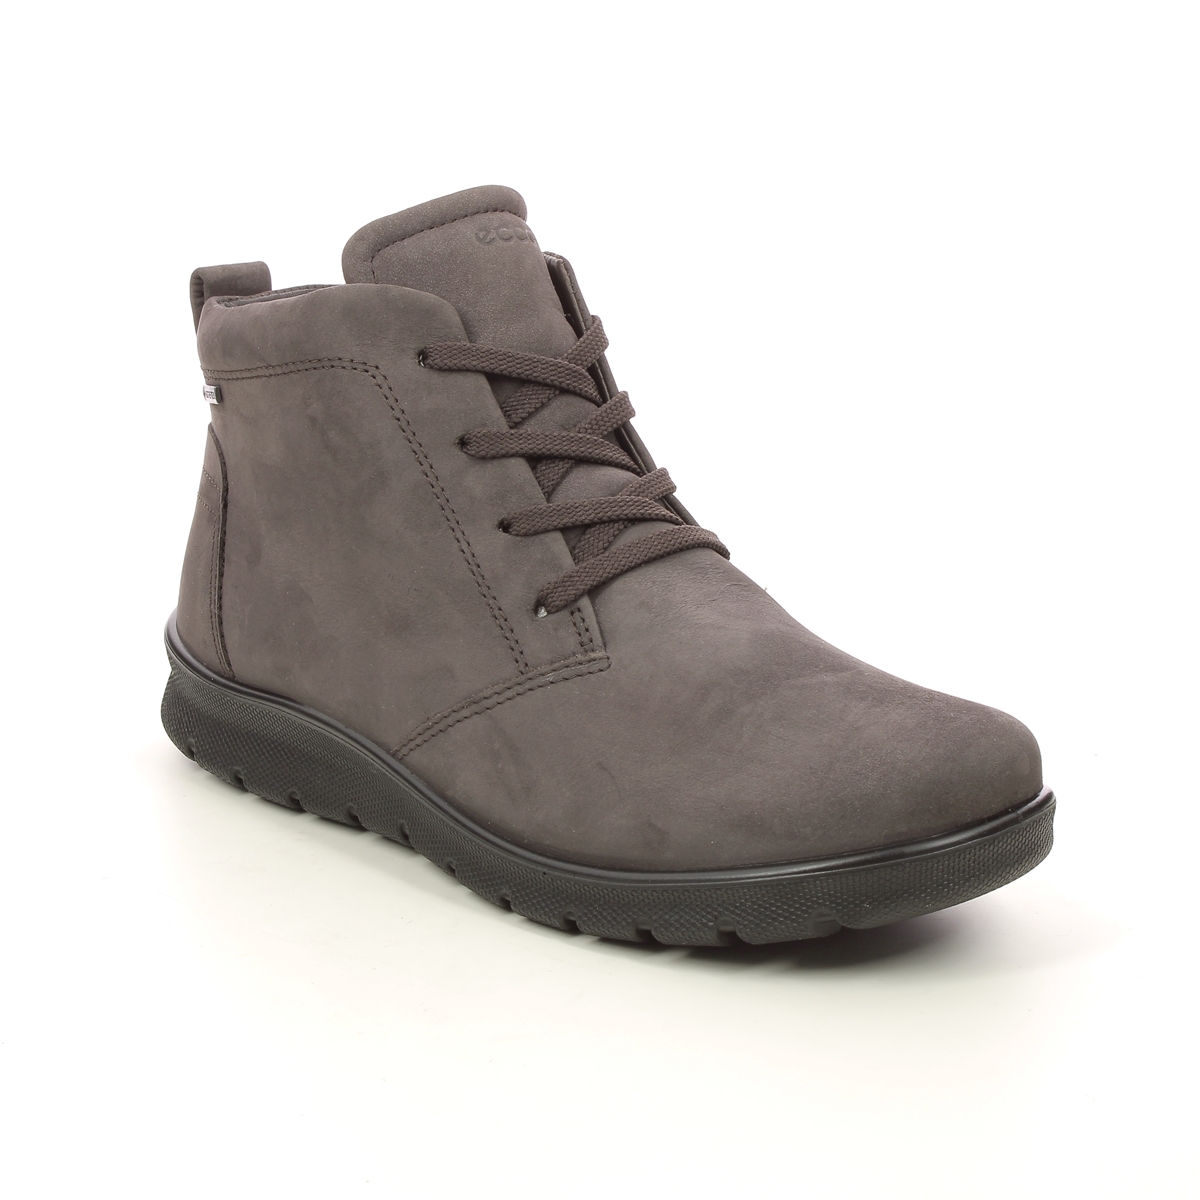 Ecco Babett Lo Gtx Brown Nubuck Womens Lace Up Boots 215583-02576 In Size 40 In Plain Brown Nubuck